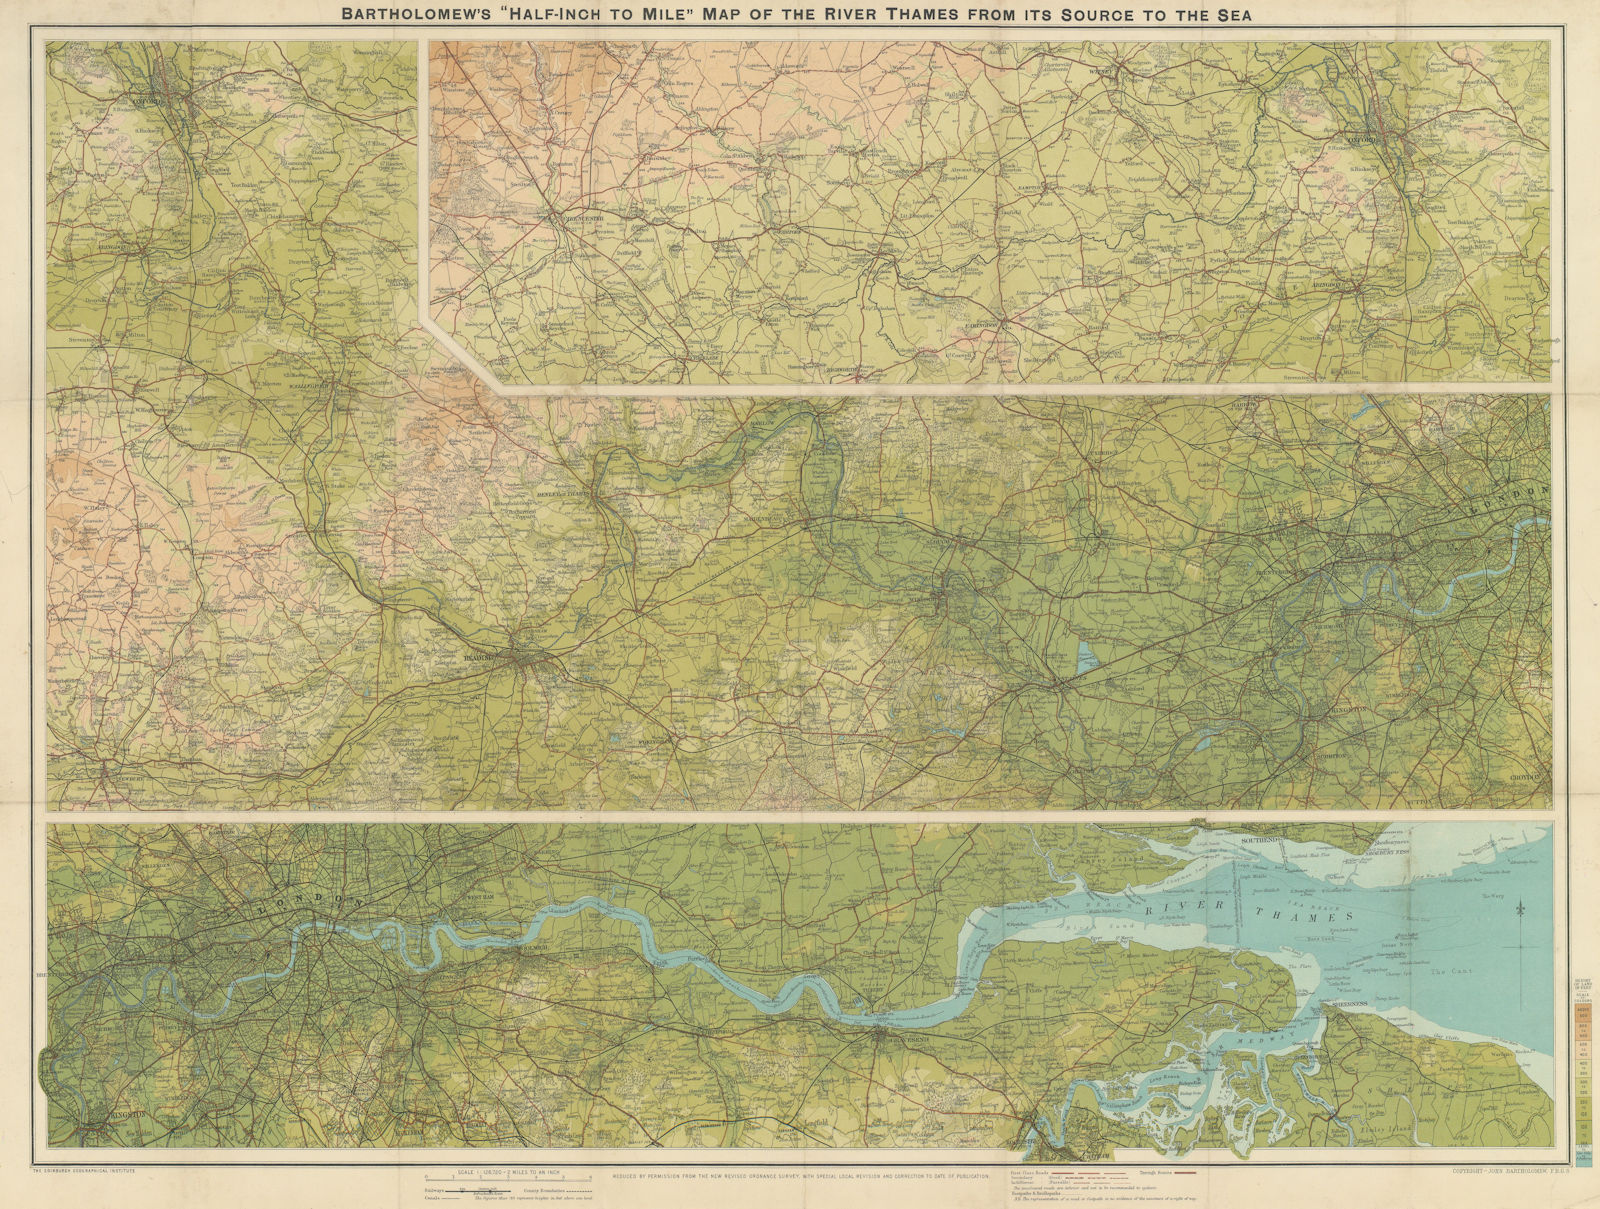 Associate Product River Thames from source to sea. Thames valley. 56x74cm BARTHOLOMEW c1905 map